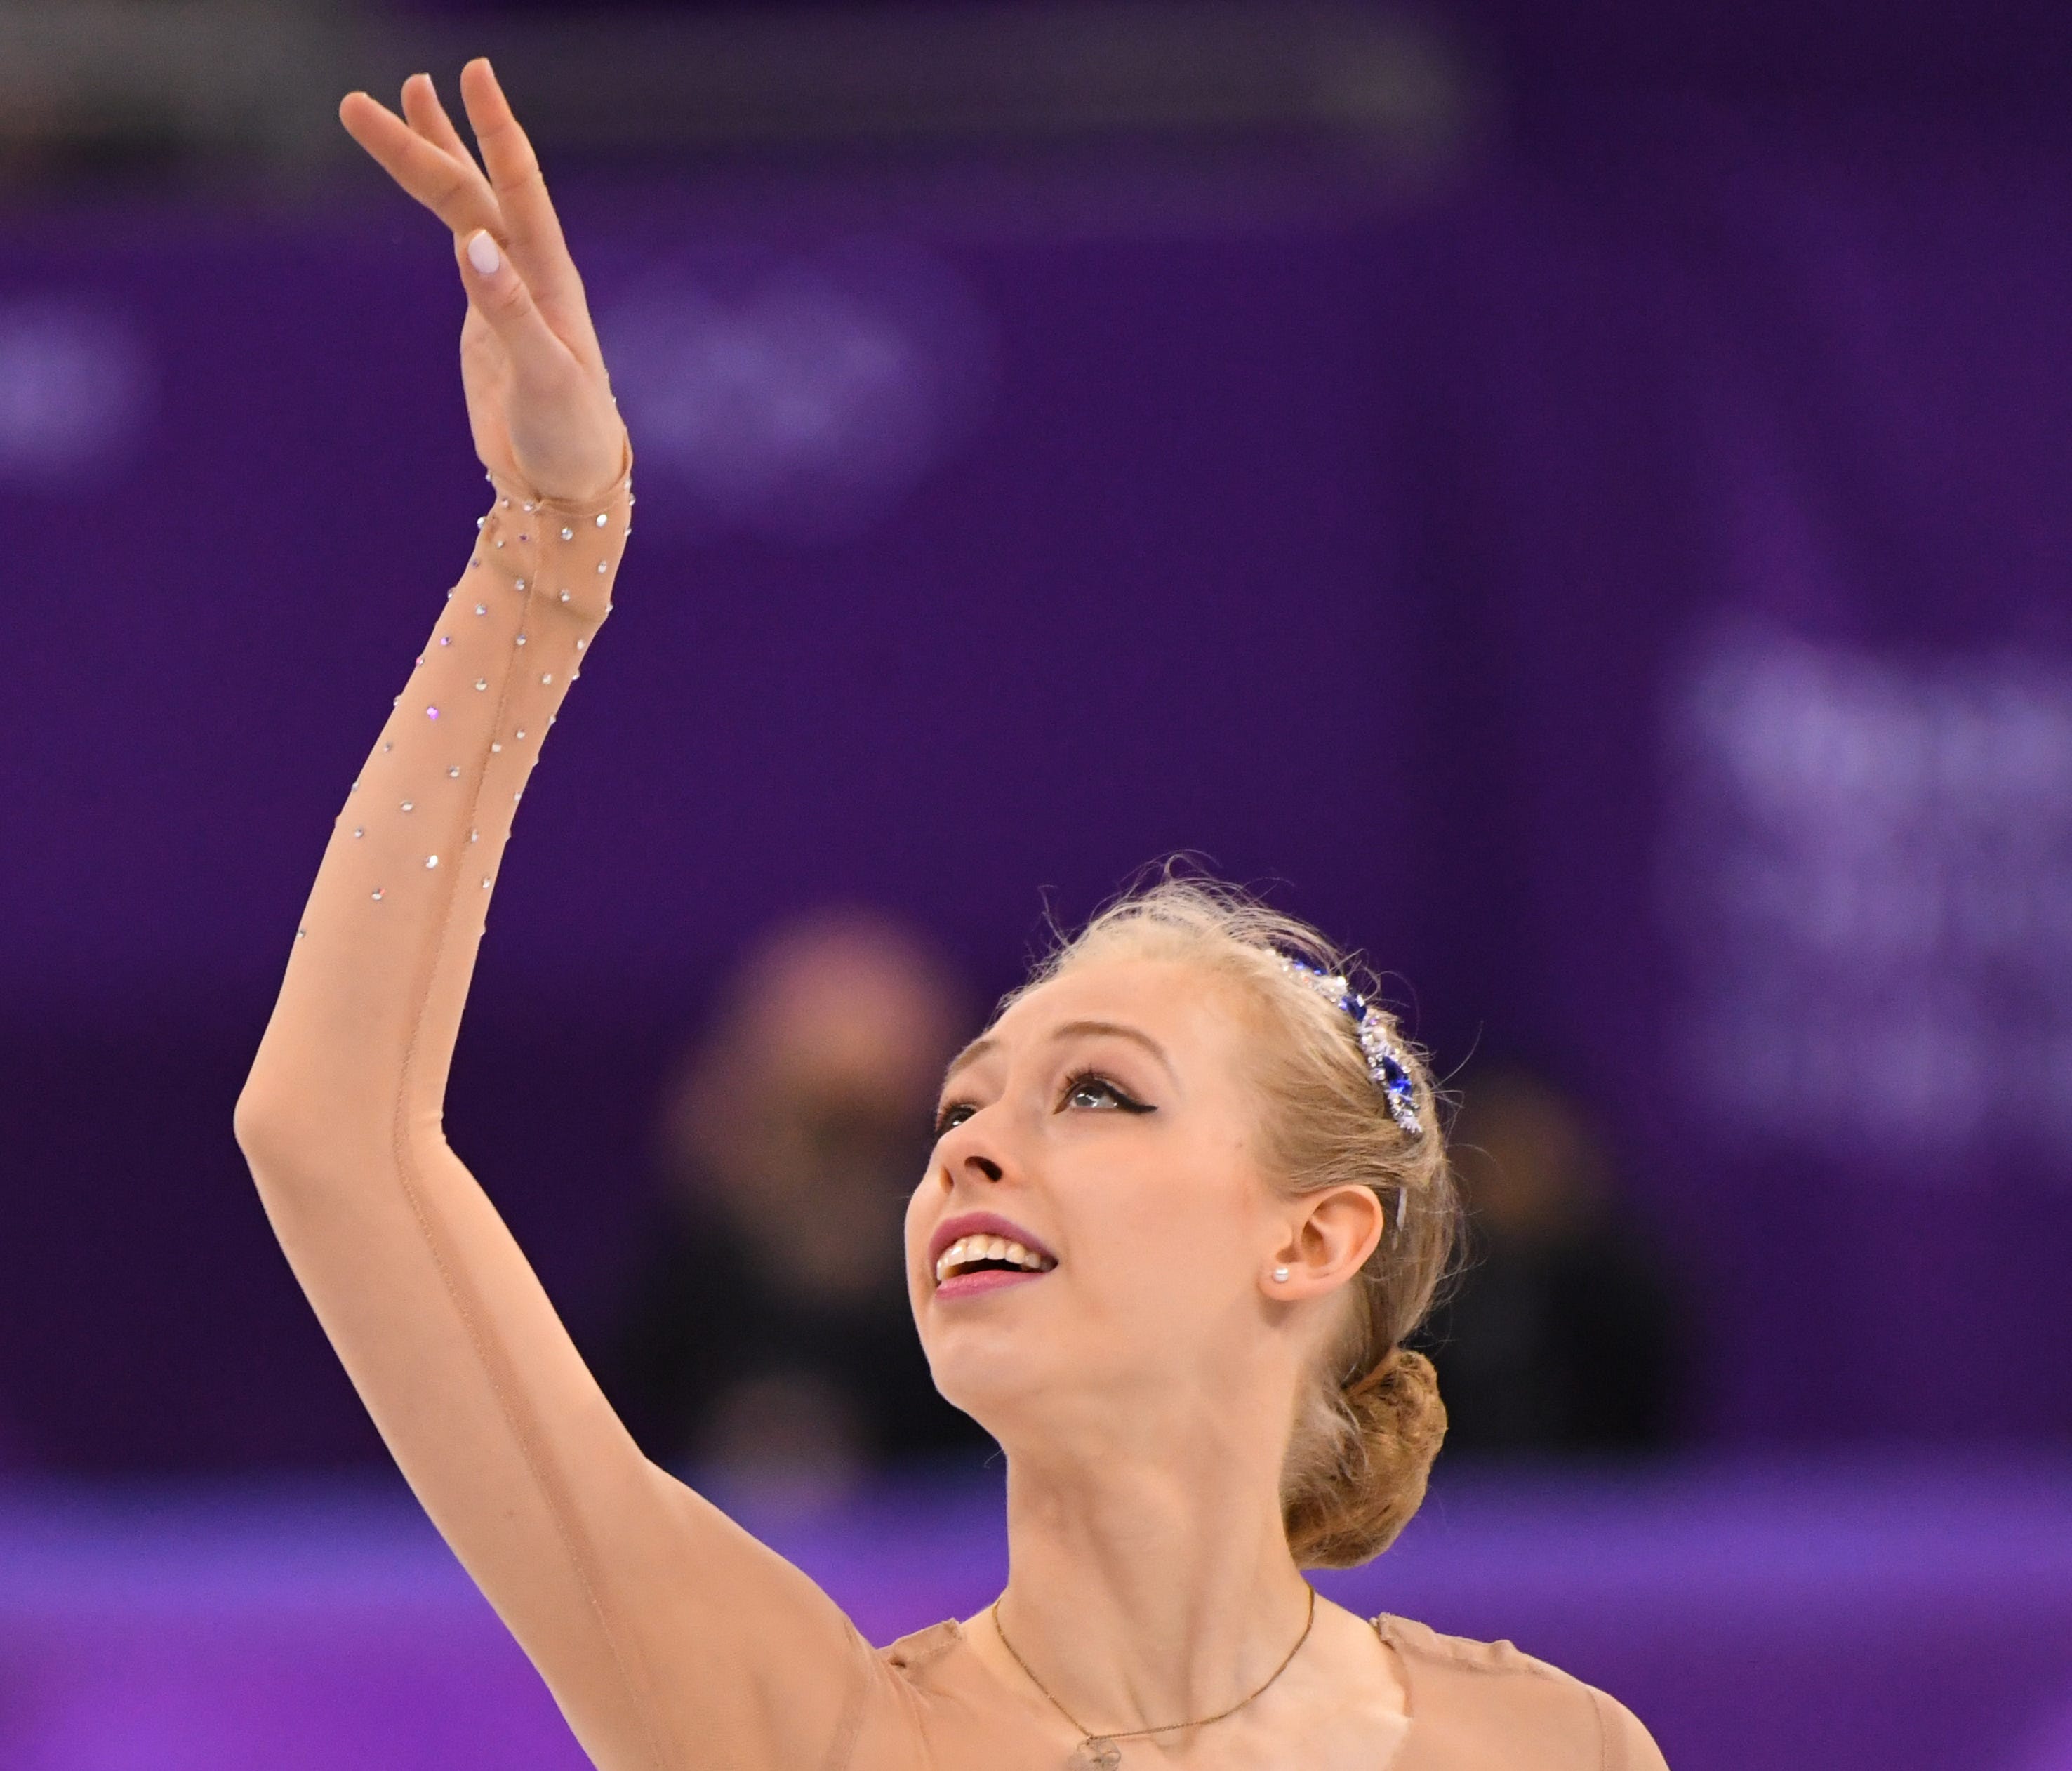 Bradie Tennell (USA) competes in the women's free skate program.